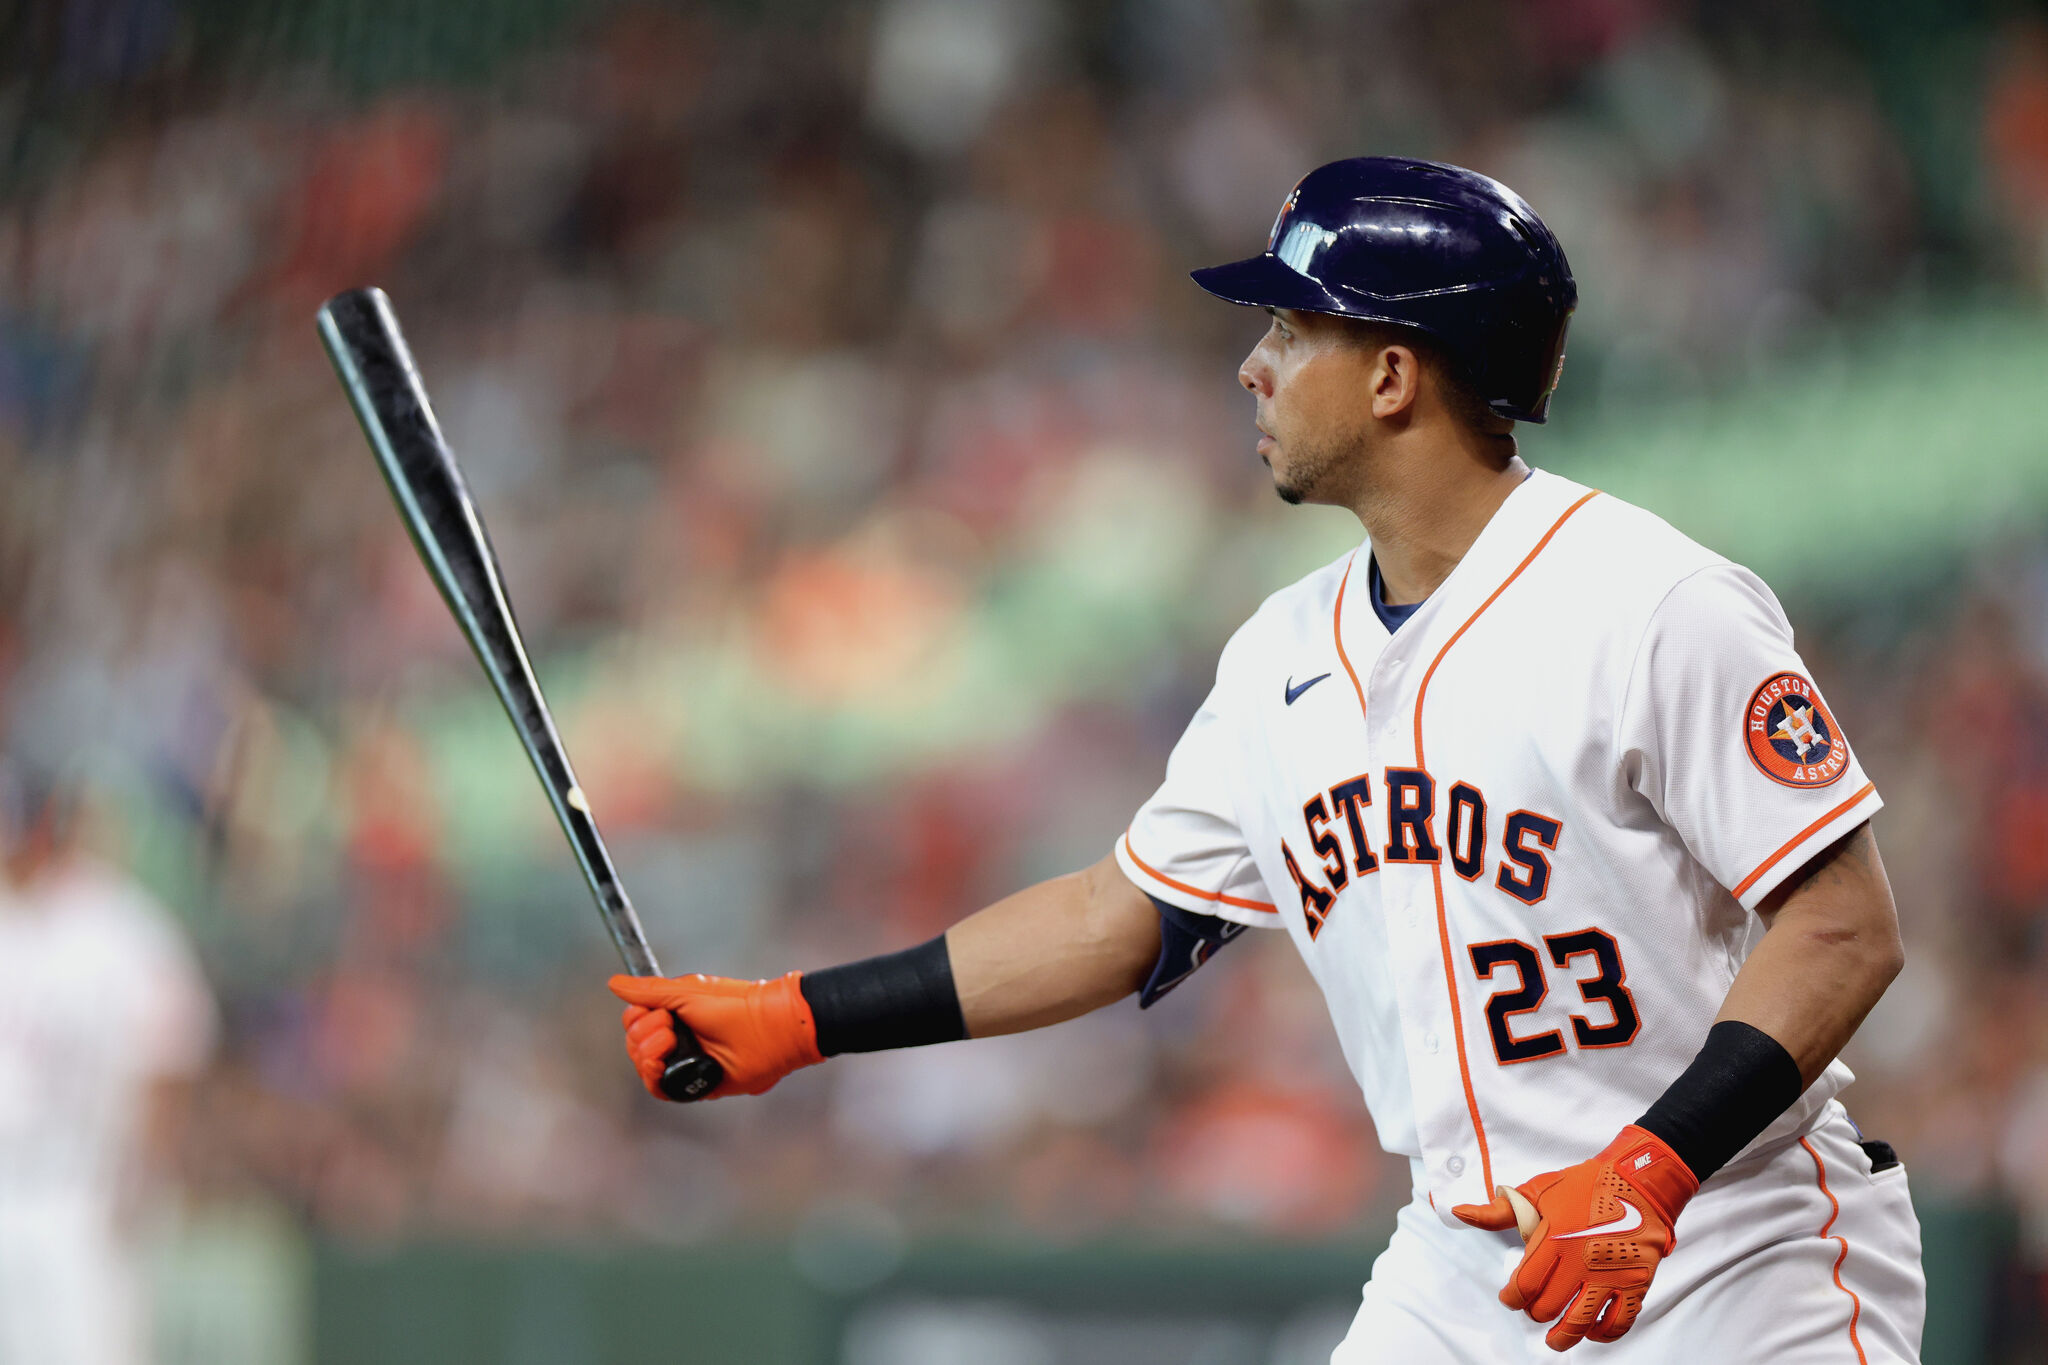 Michael Brantley happy to be back in Astros' outfield